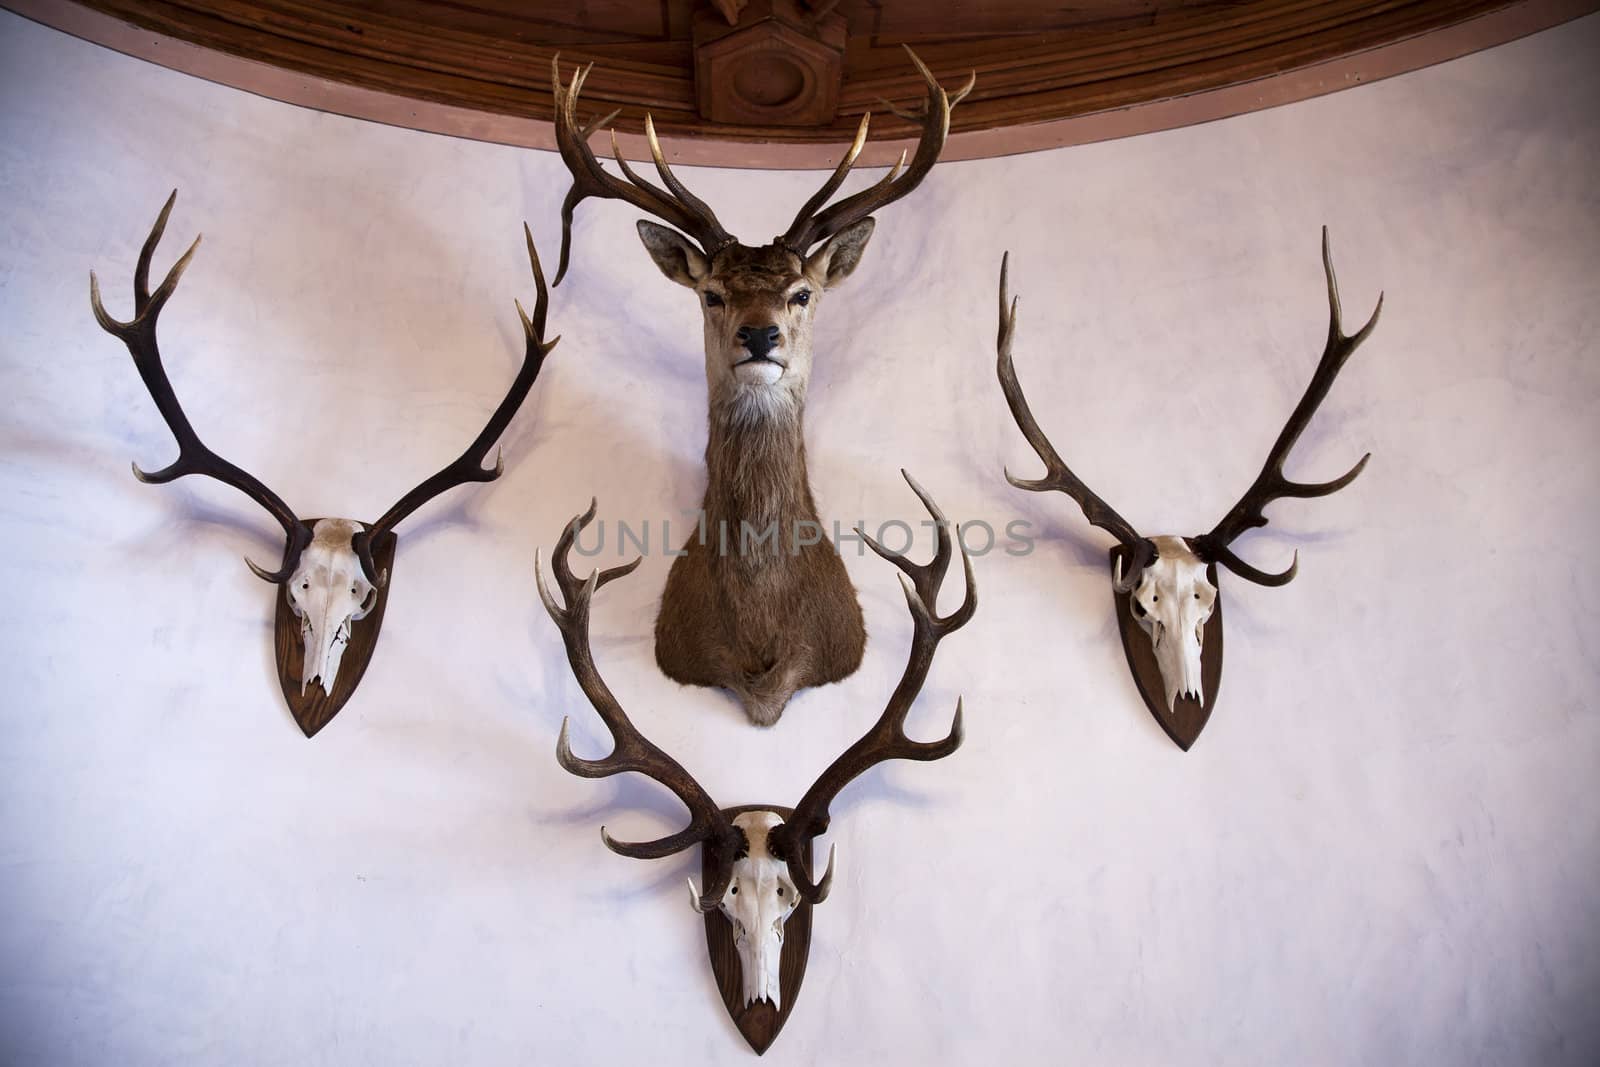 Deer skulls and stuffed stag head hung on a curved wall.